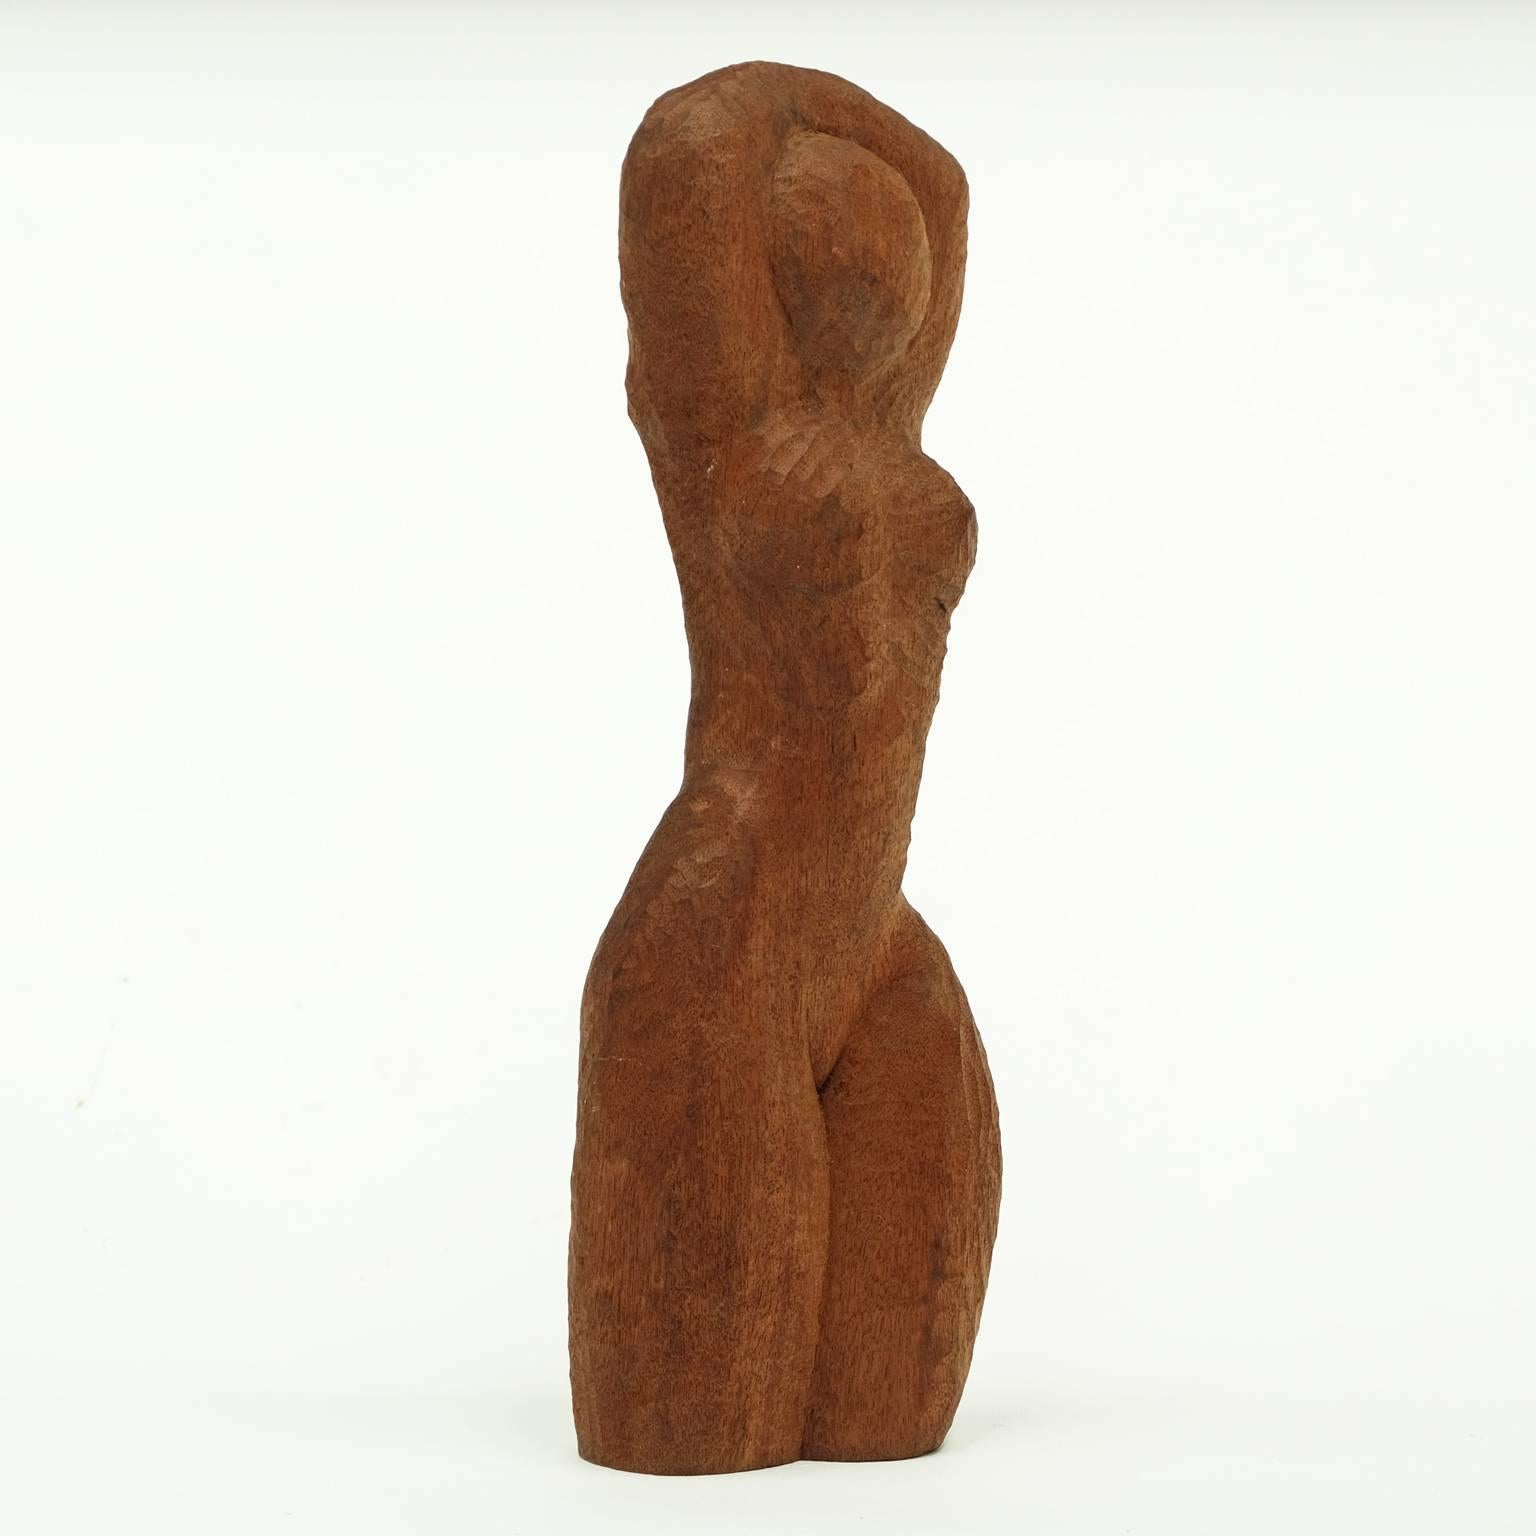 1960s hand-carved female nude sculpture in African teak.

Measures: H 44cm x W 16cm x D 9cm.